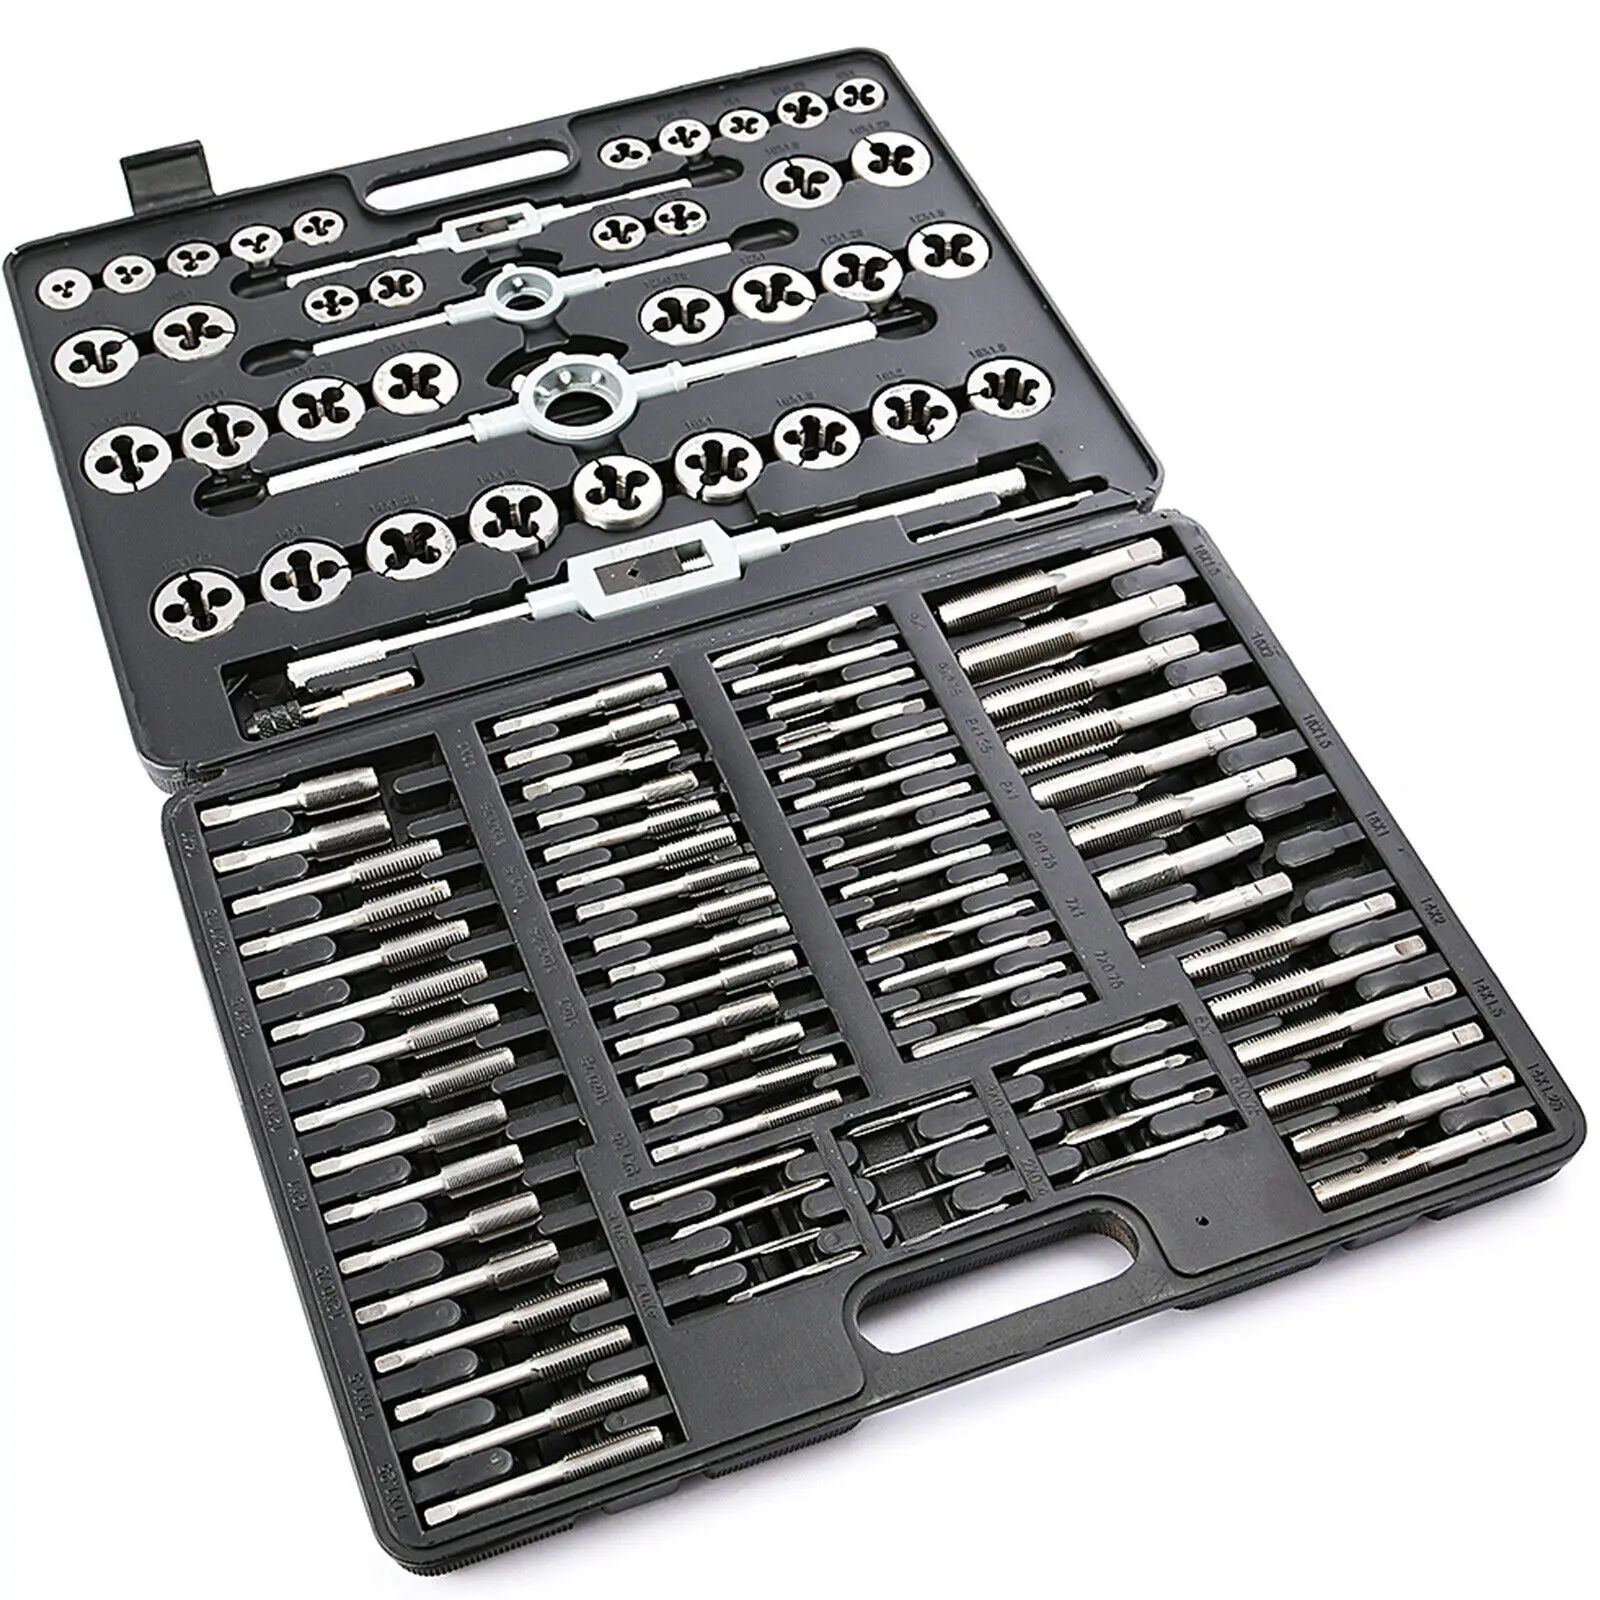 

110Pcs Tap and Die Set Tungsten Steel Titanium Tap and Die Combination Set For Cutting External & Internal Threads